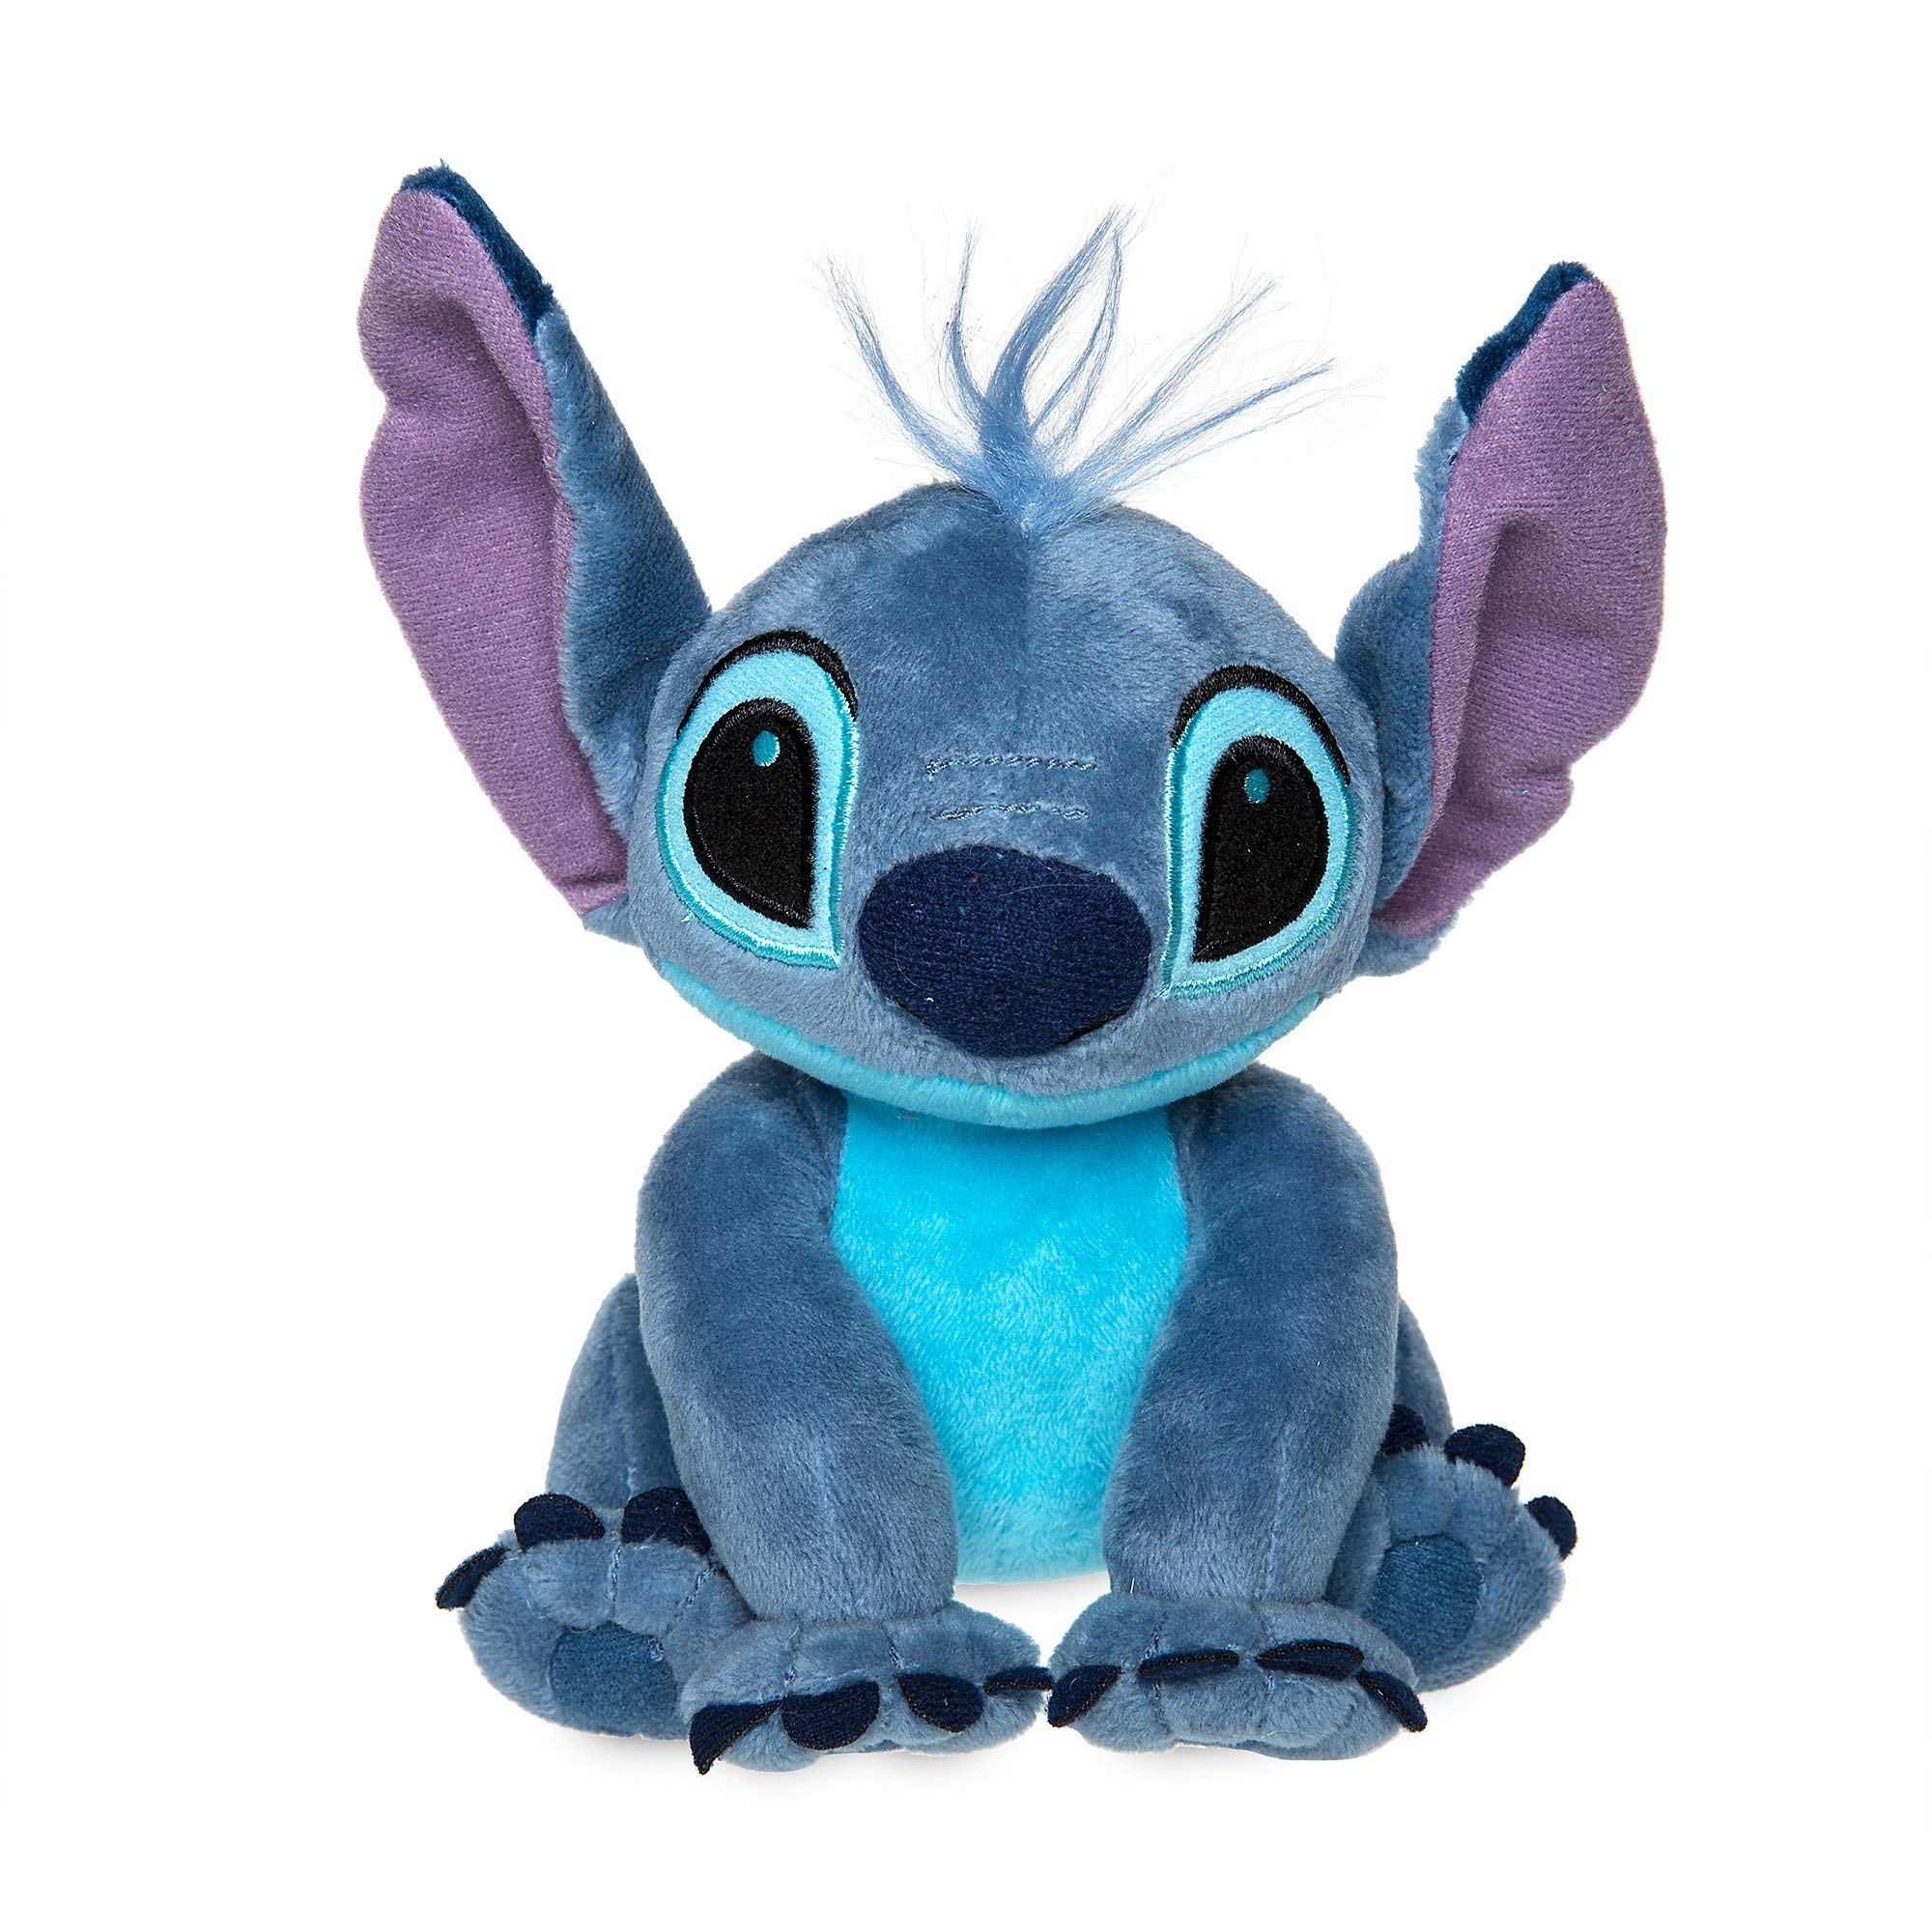 Disney Stitch Plush - Mini Bean Bag, Lilo and Stitch, Cuddly Alien Soft Toy with Big Floppy Ears and Fuzzy Texture, Suitable for All Ages 0+